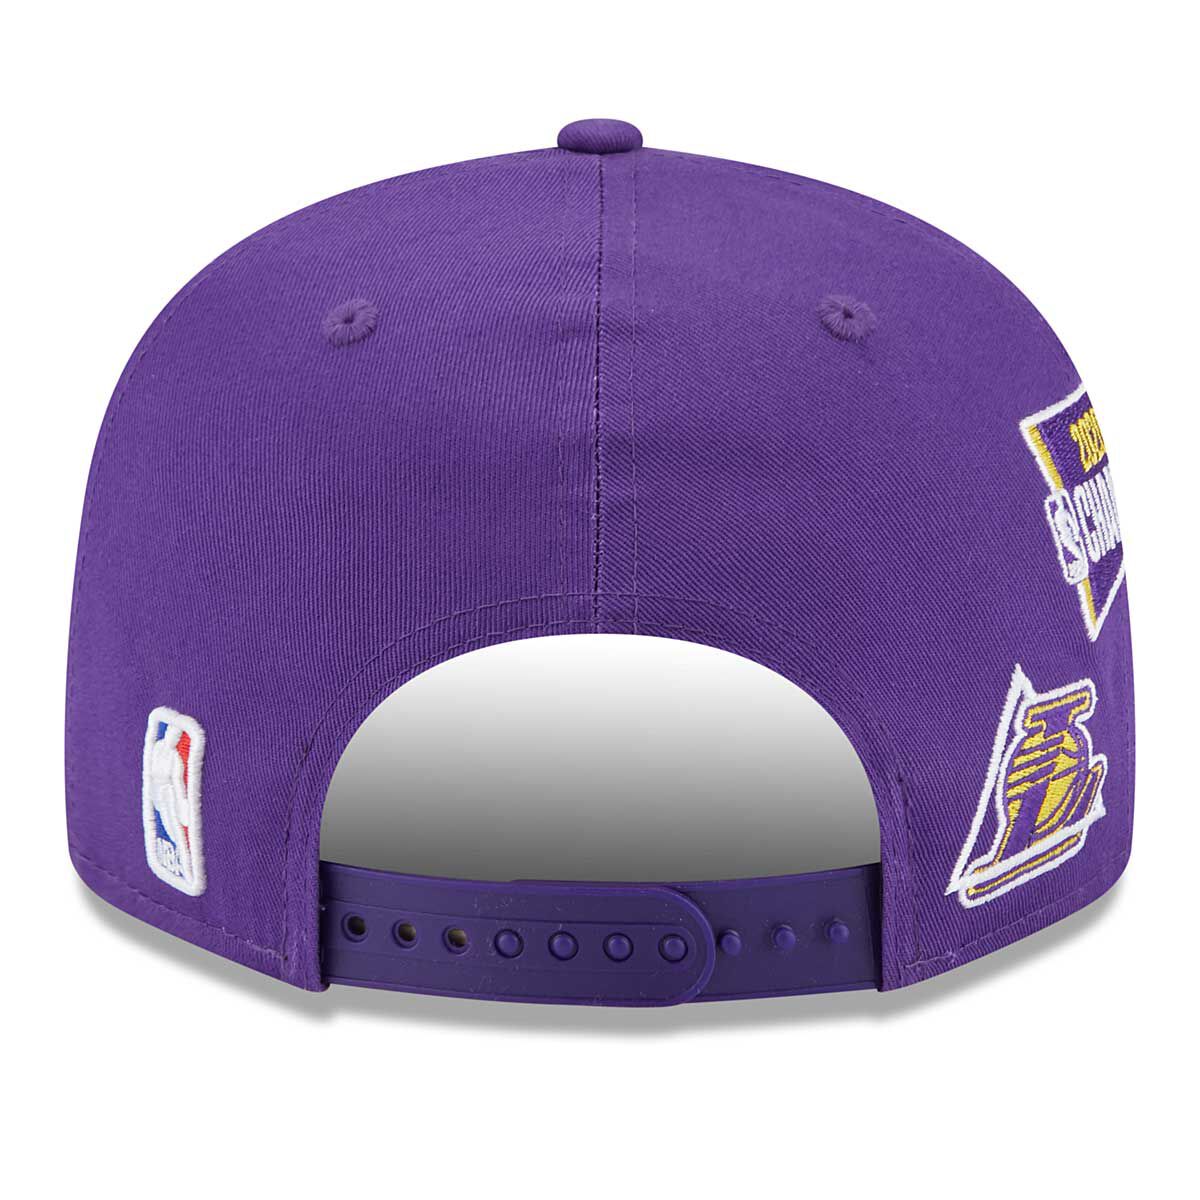 NBA LOS ANGELES LAKERS CHAMPIONS PATCH 9FIFTY SNAPBACK CAP